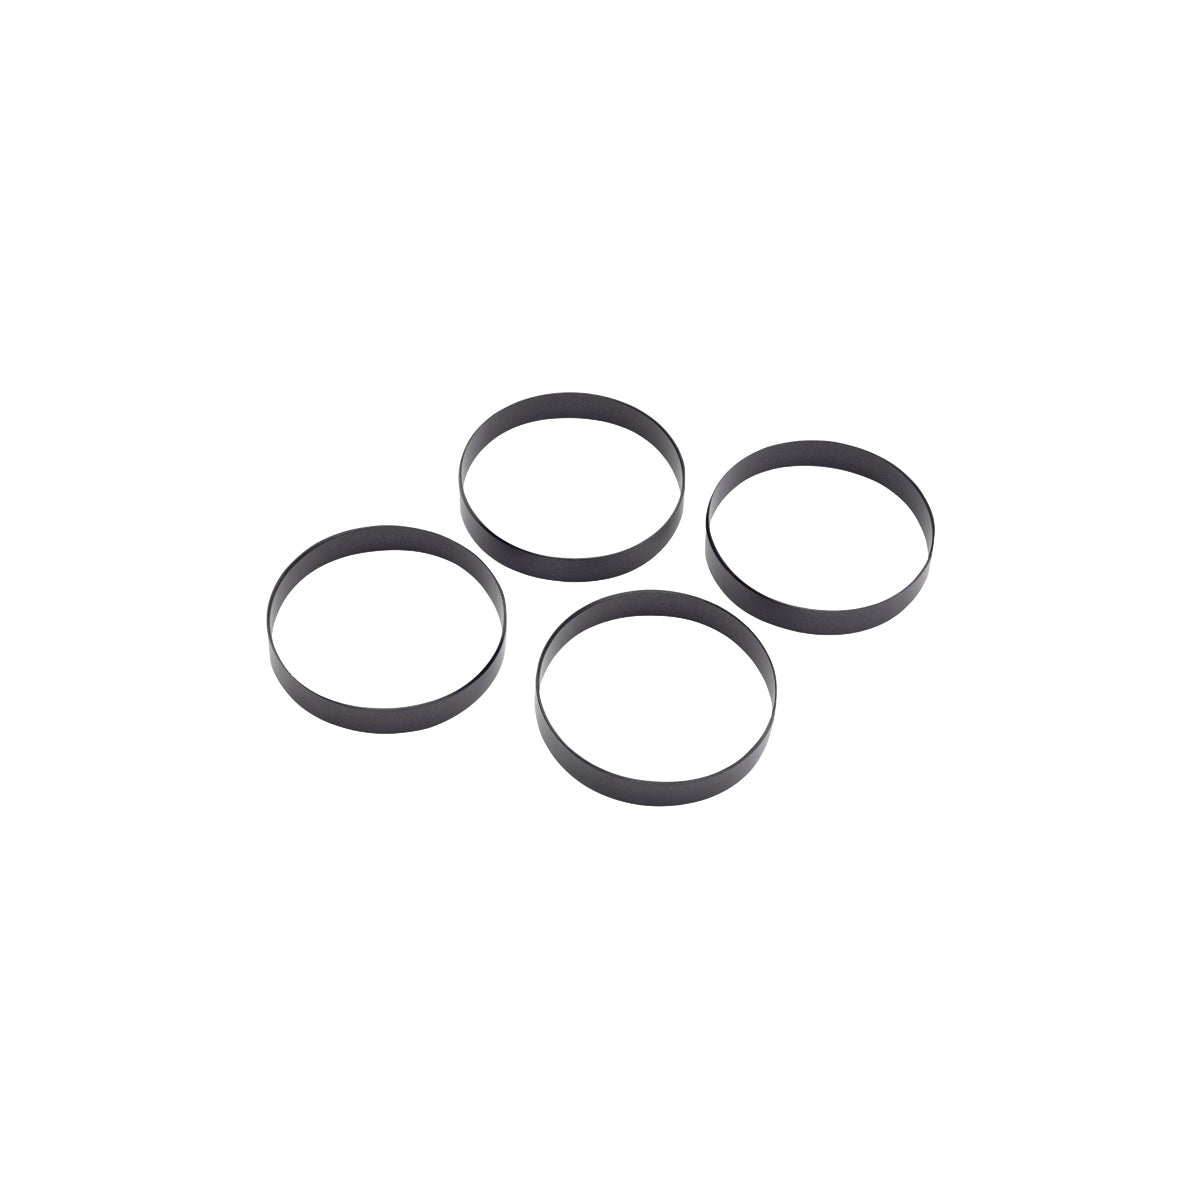 WLTBARBSER Wiltshire Bar B Egg Rings Pack of 4 Tomkin Australia Hospitality Supplies